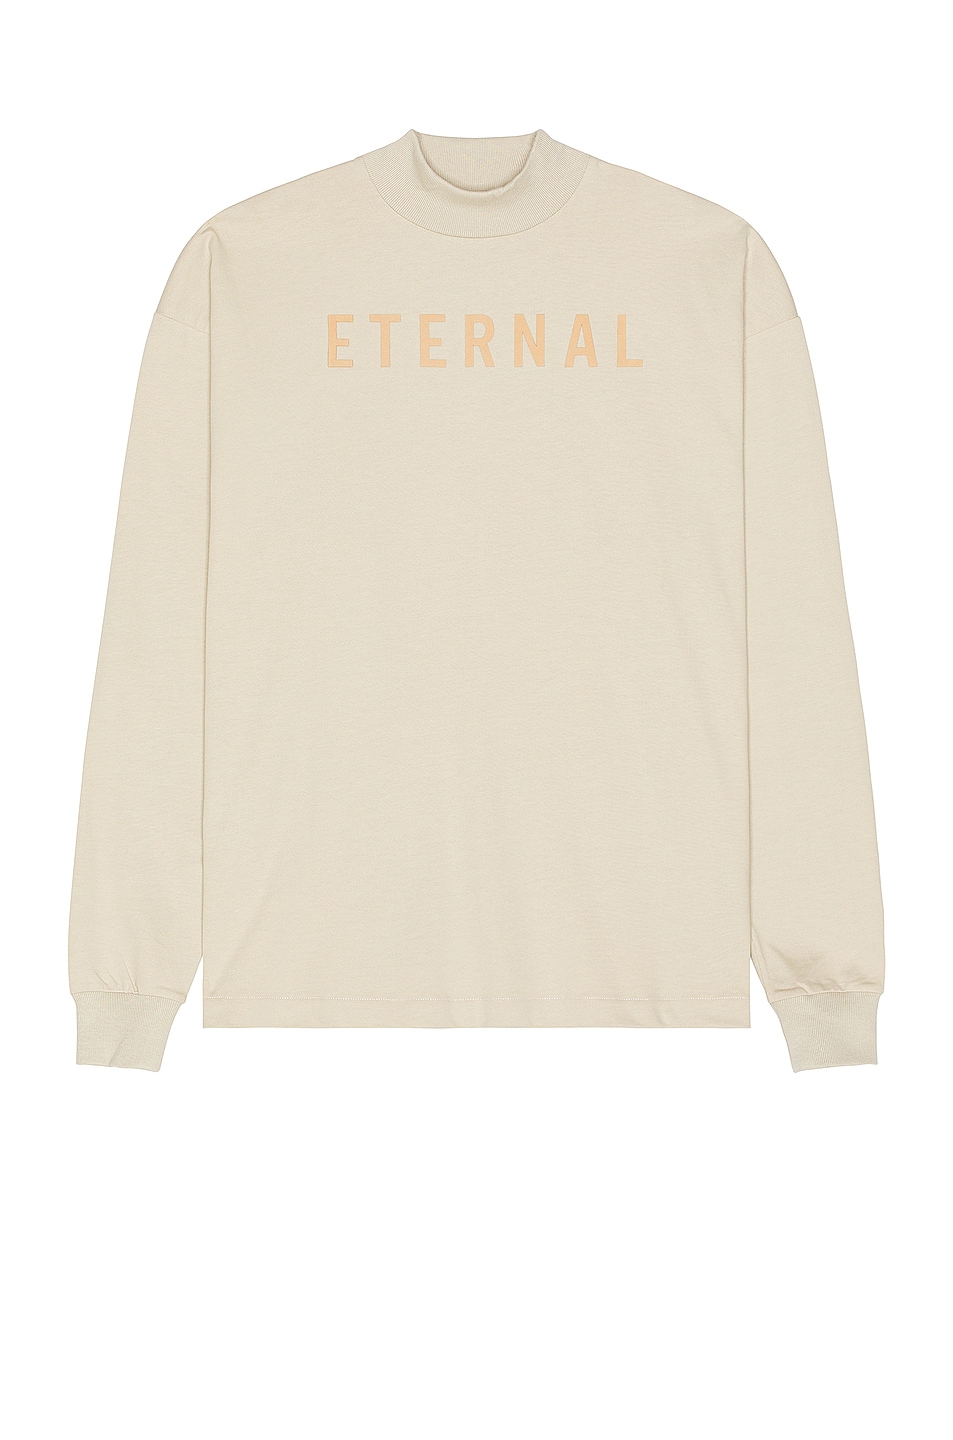 Image 1 of Fear of God Eternal Tshirt in Cement